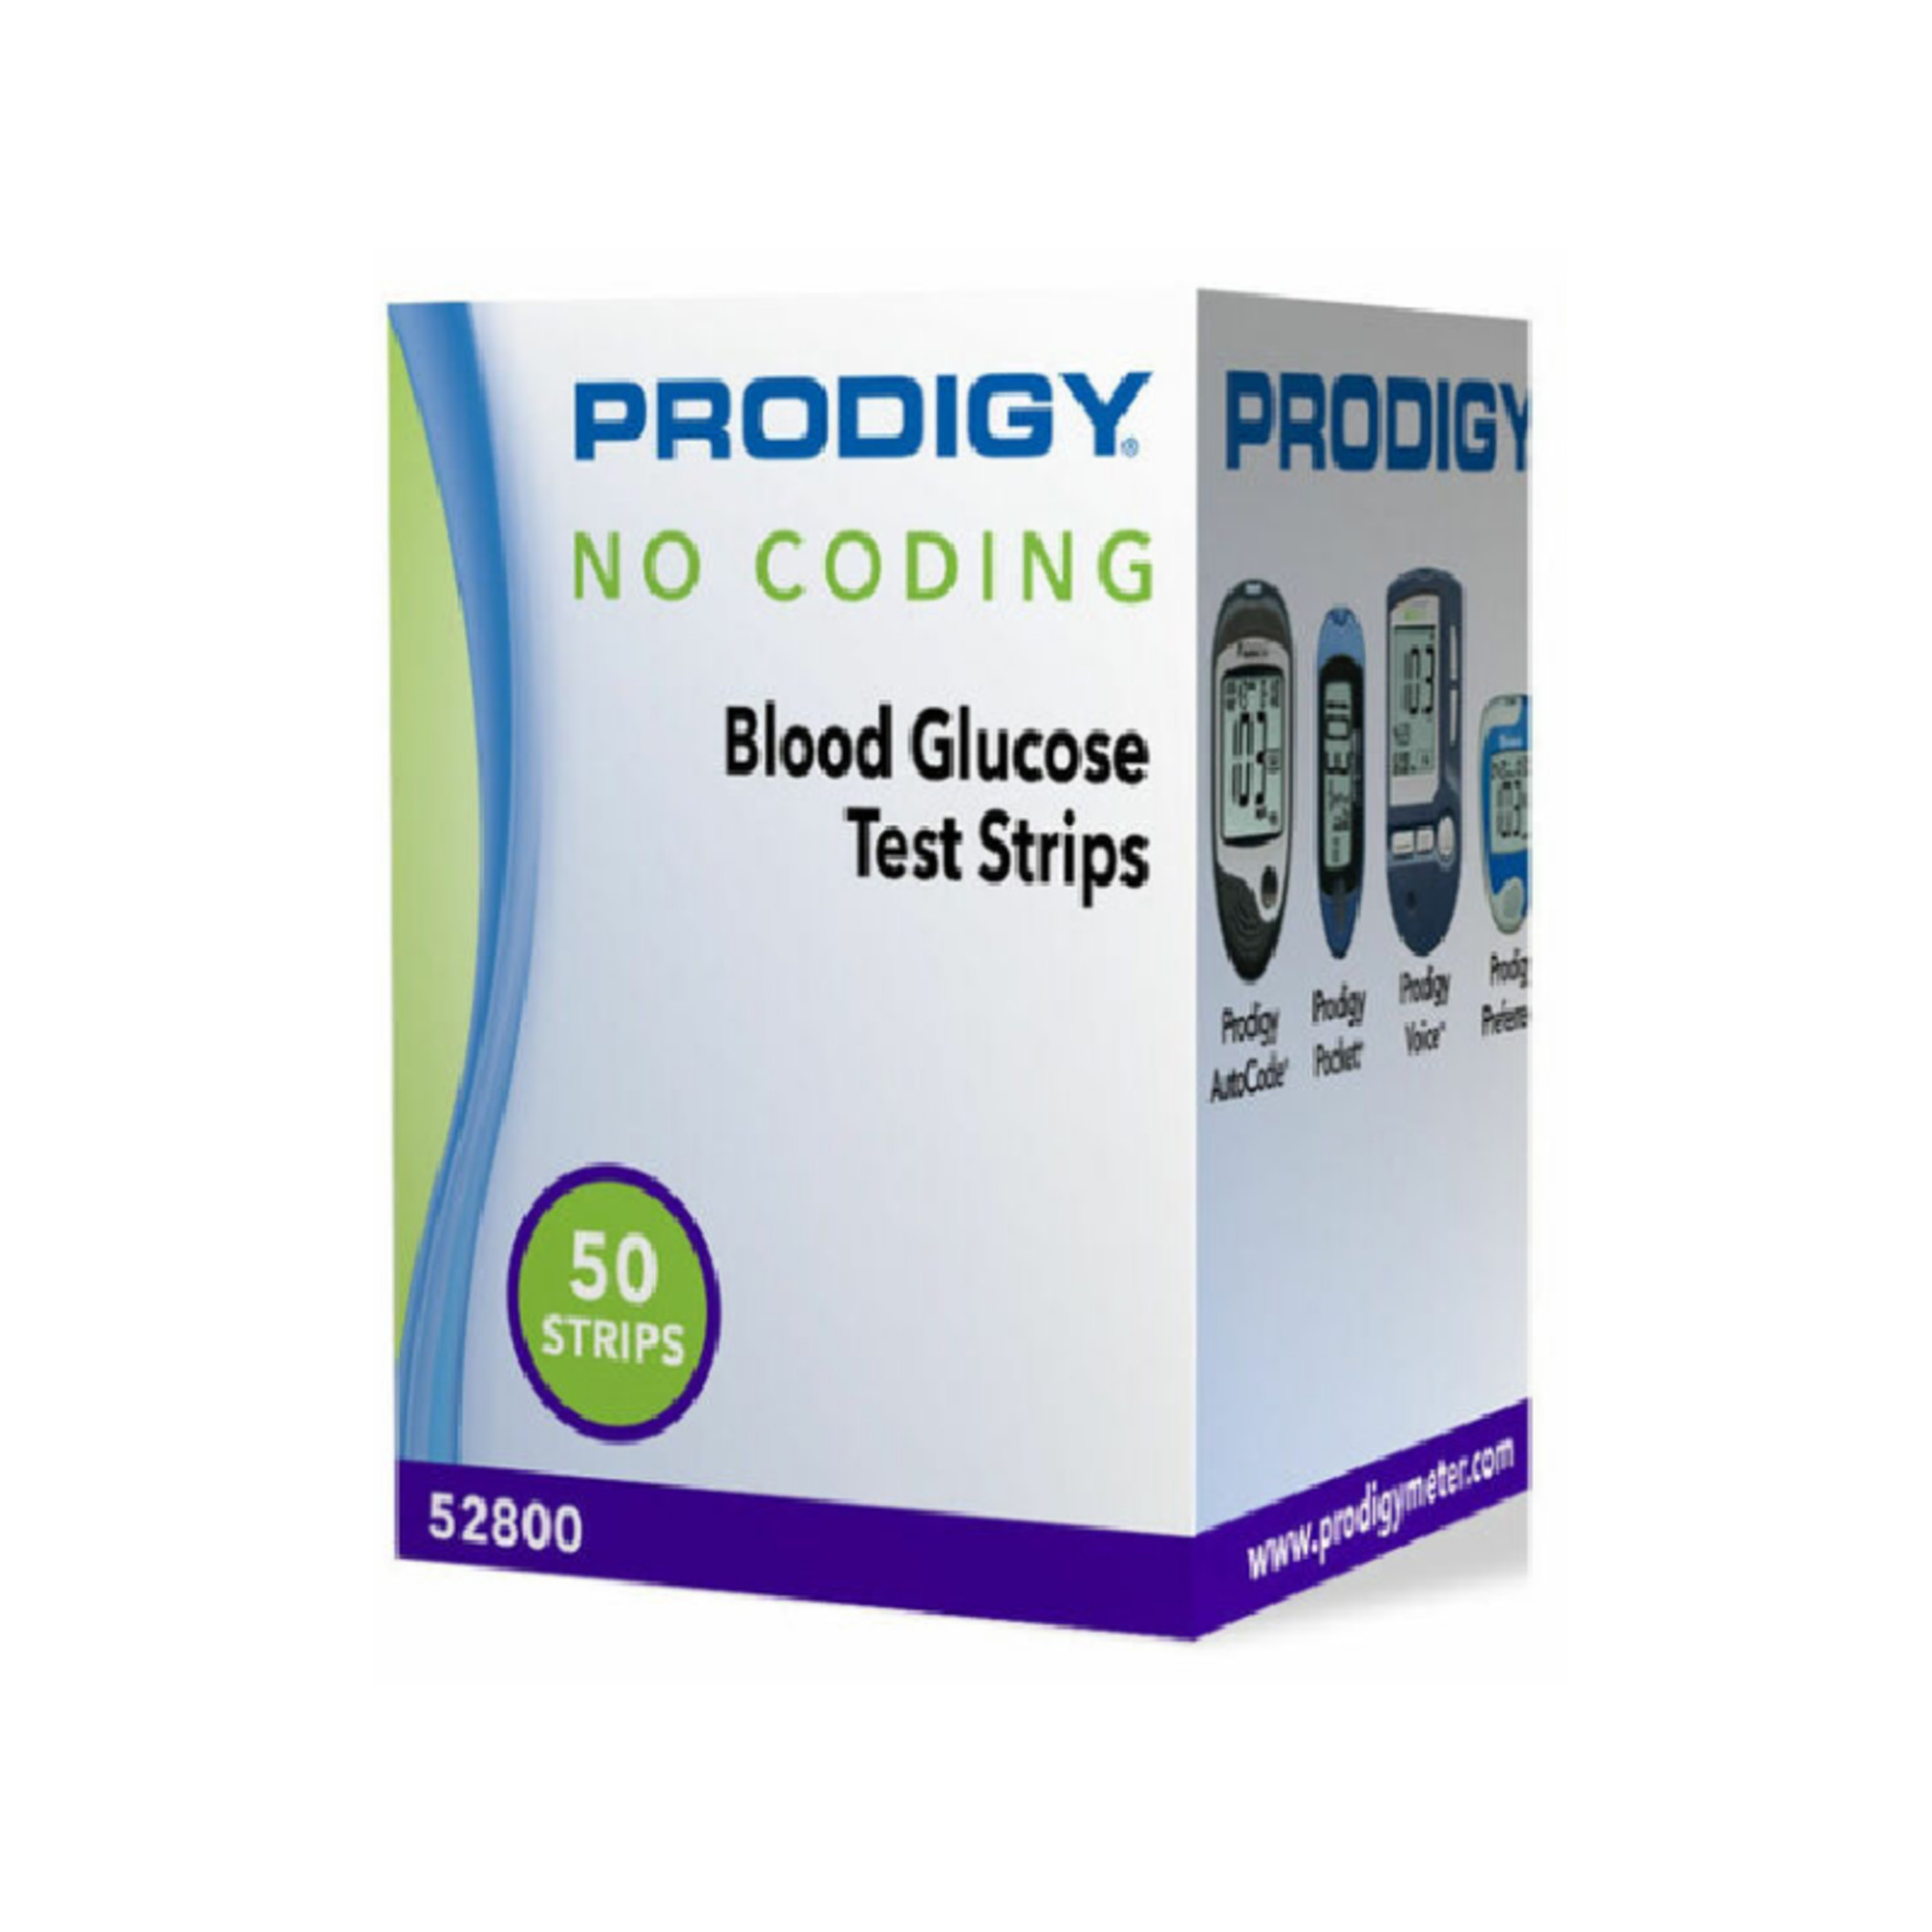 Prodigy Test Strips 50 Count - image 1 of 5